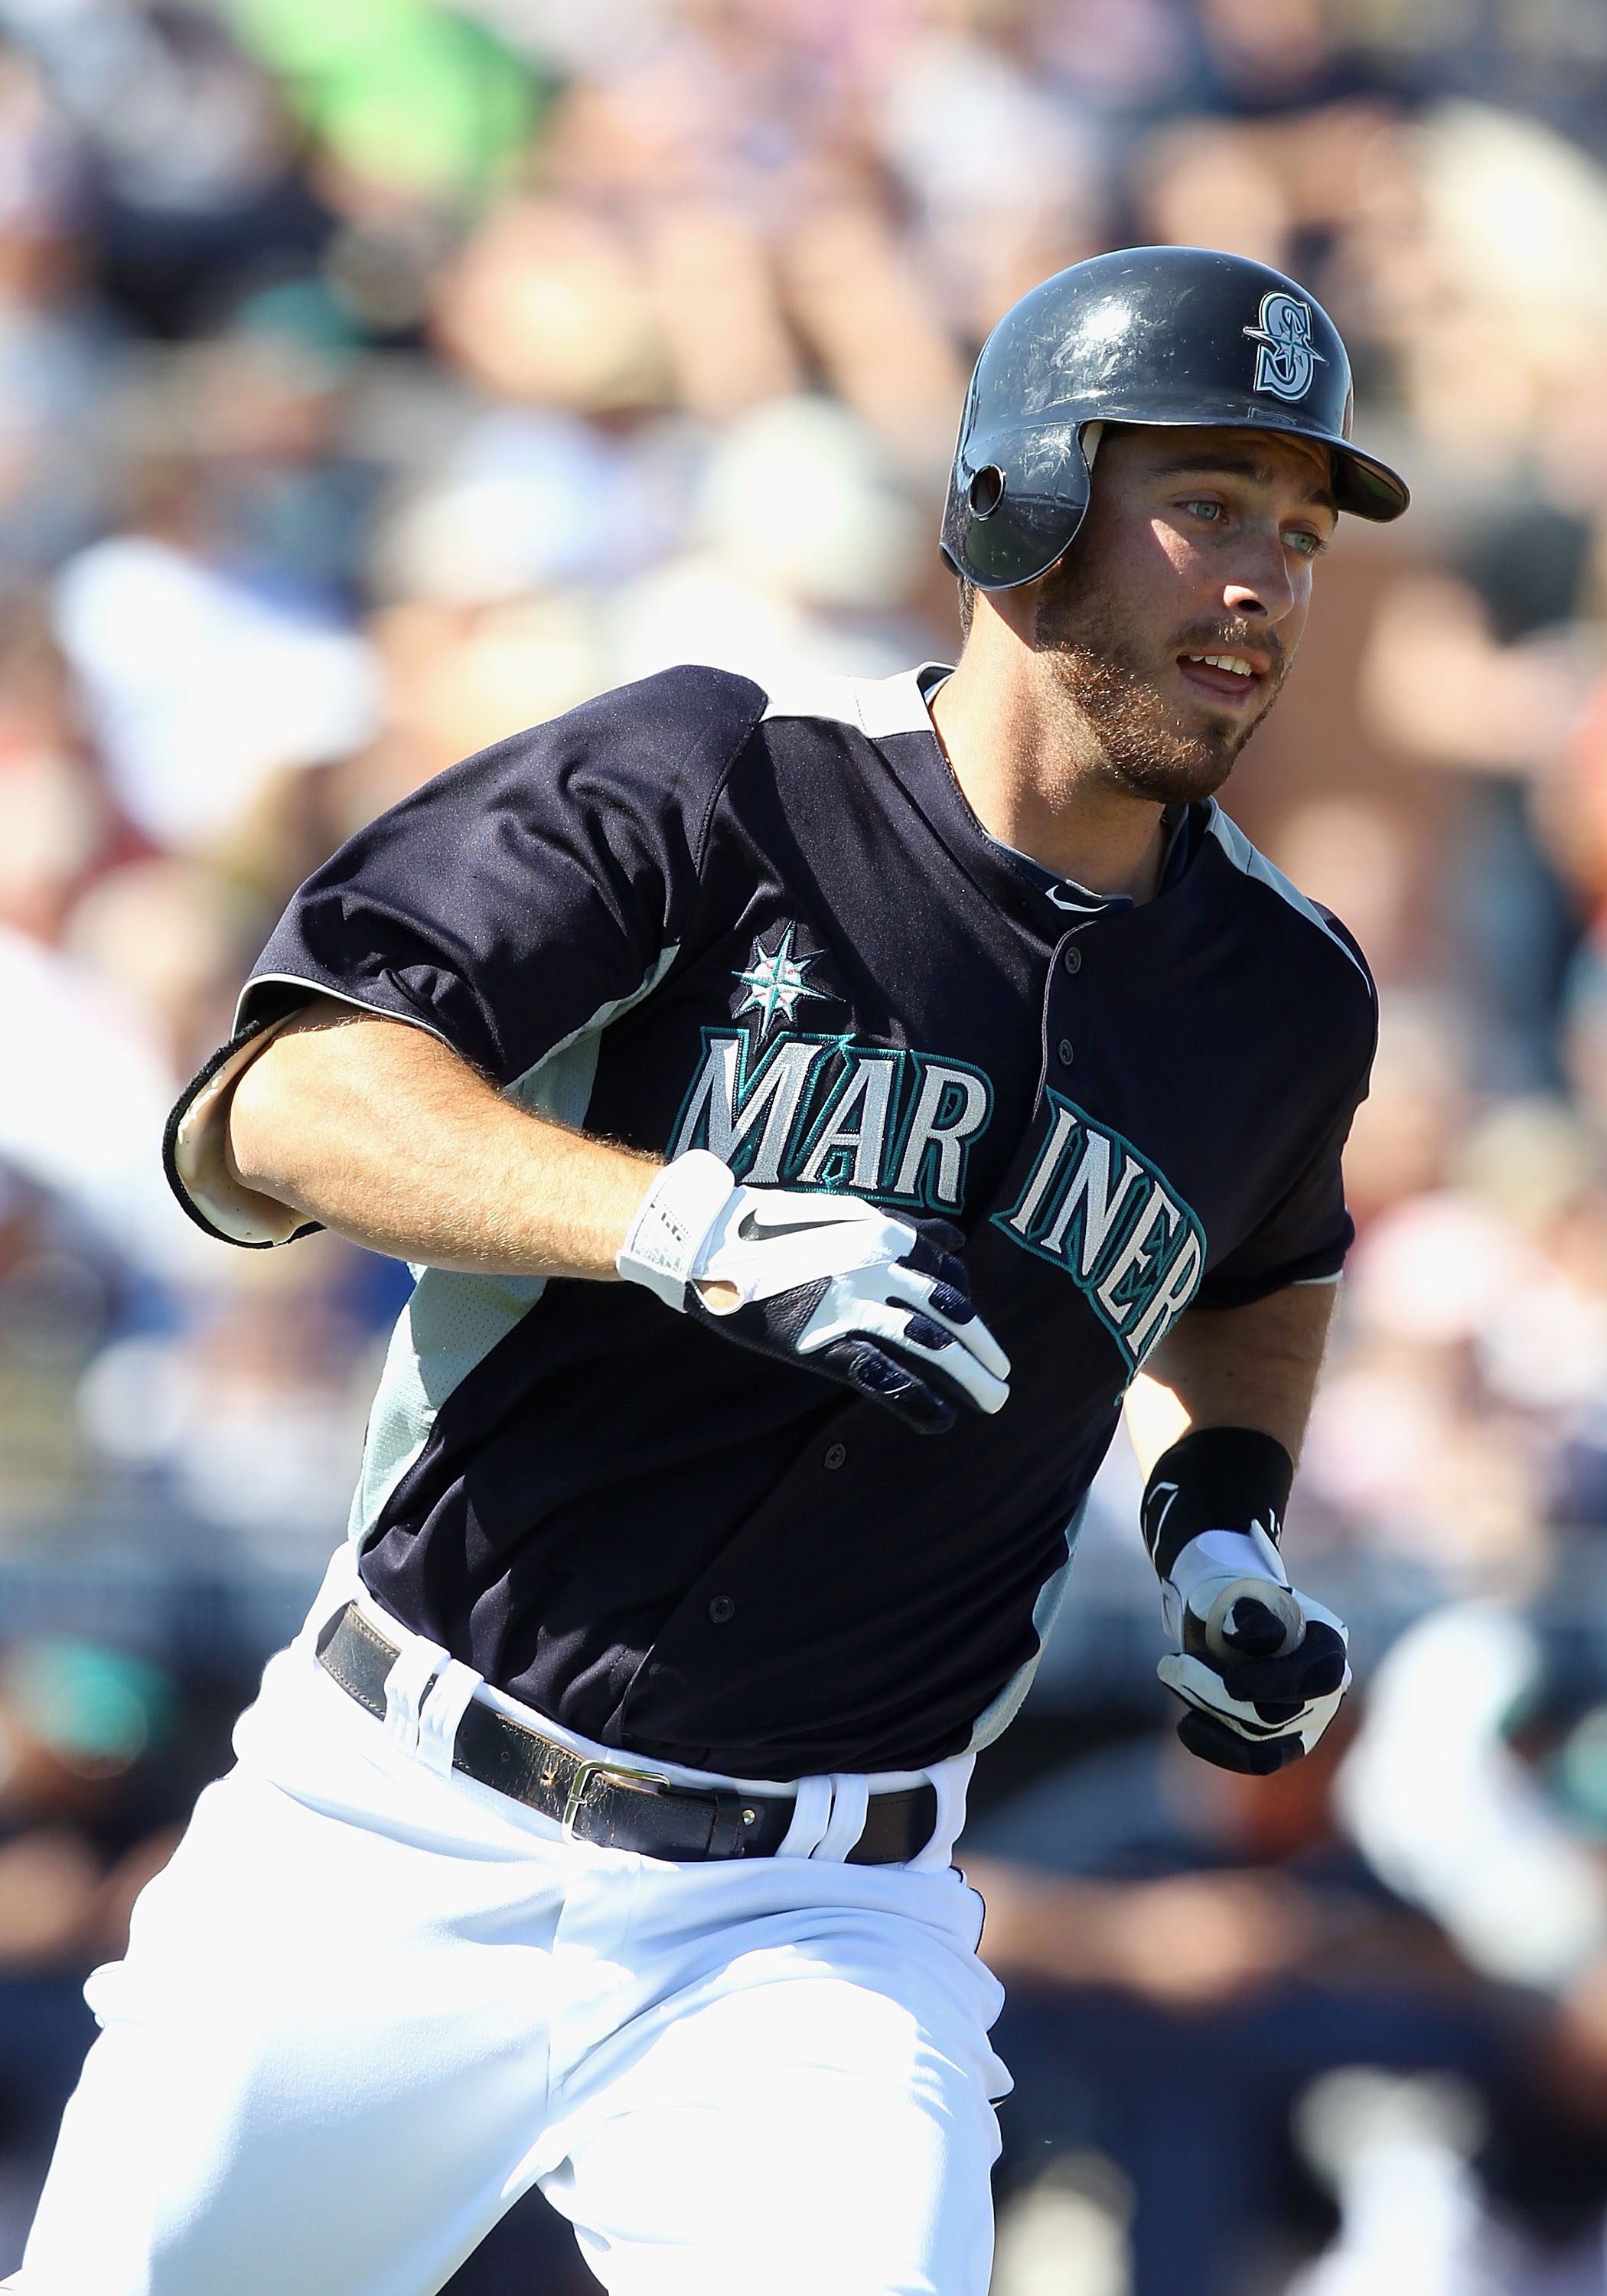 PEORIA, AZ - MARCH 04:  Dustin Ackley #13 of the Seattle Mariners runs to first base during the spring training game against the Cincinnati Reds at Peoria Stadium on March 4, 2011 in Peoria, Arizona.  (Photo by Christian Petersen/Getty Images)